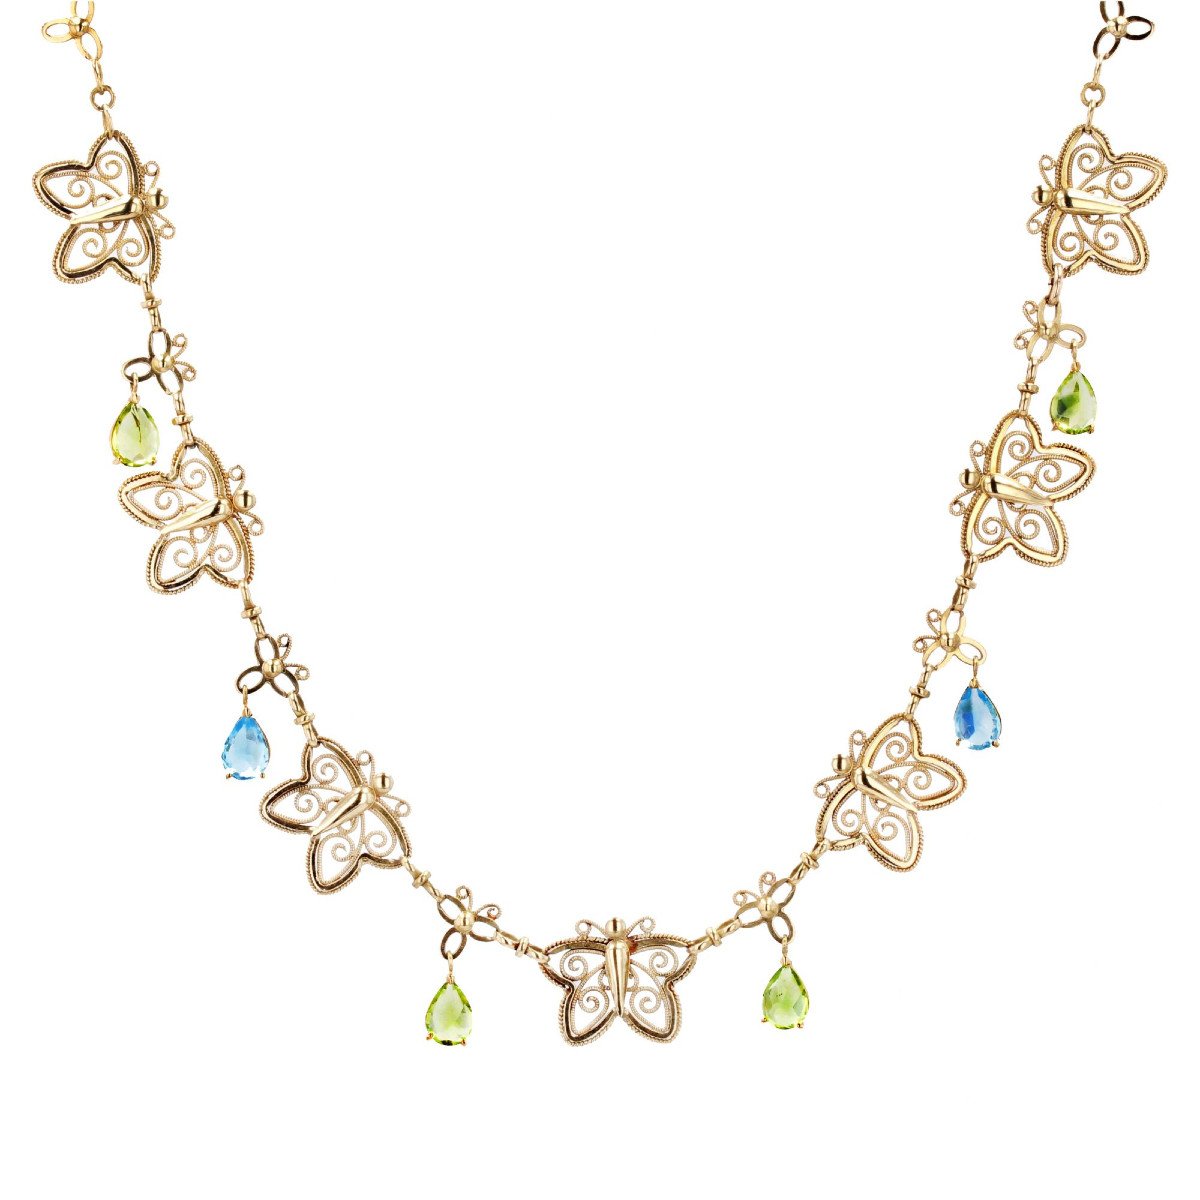 Antique Gold Topaz And Peridots Butterflies Necklace